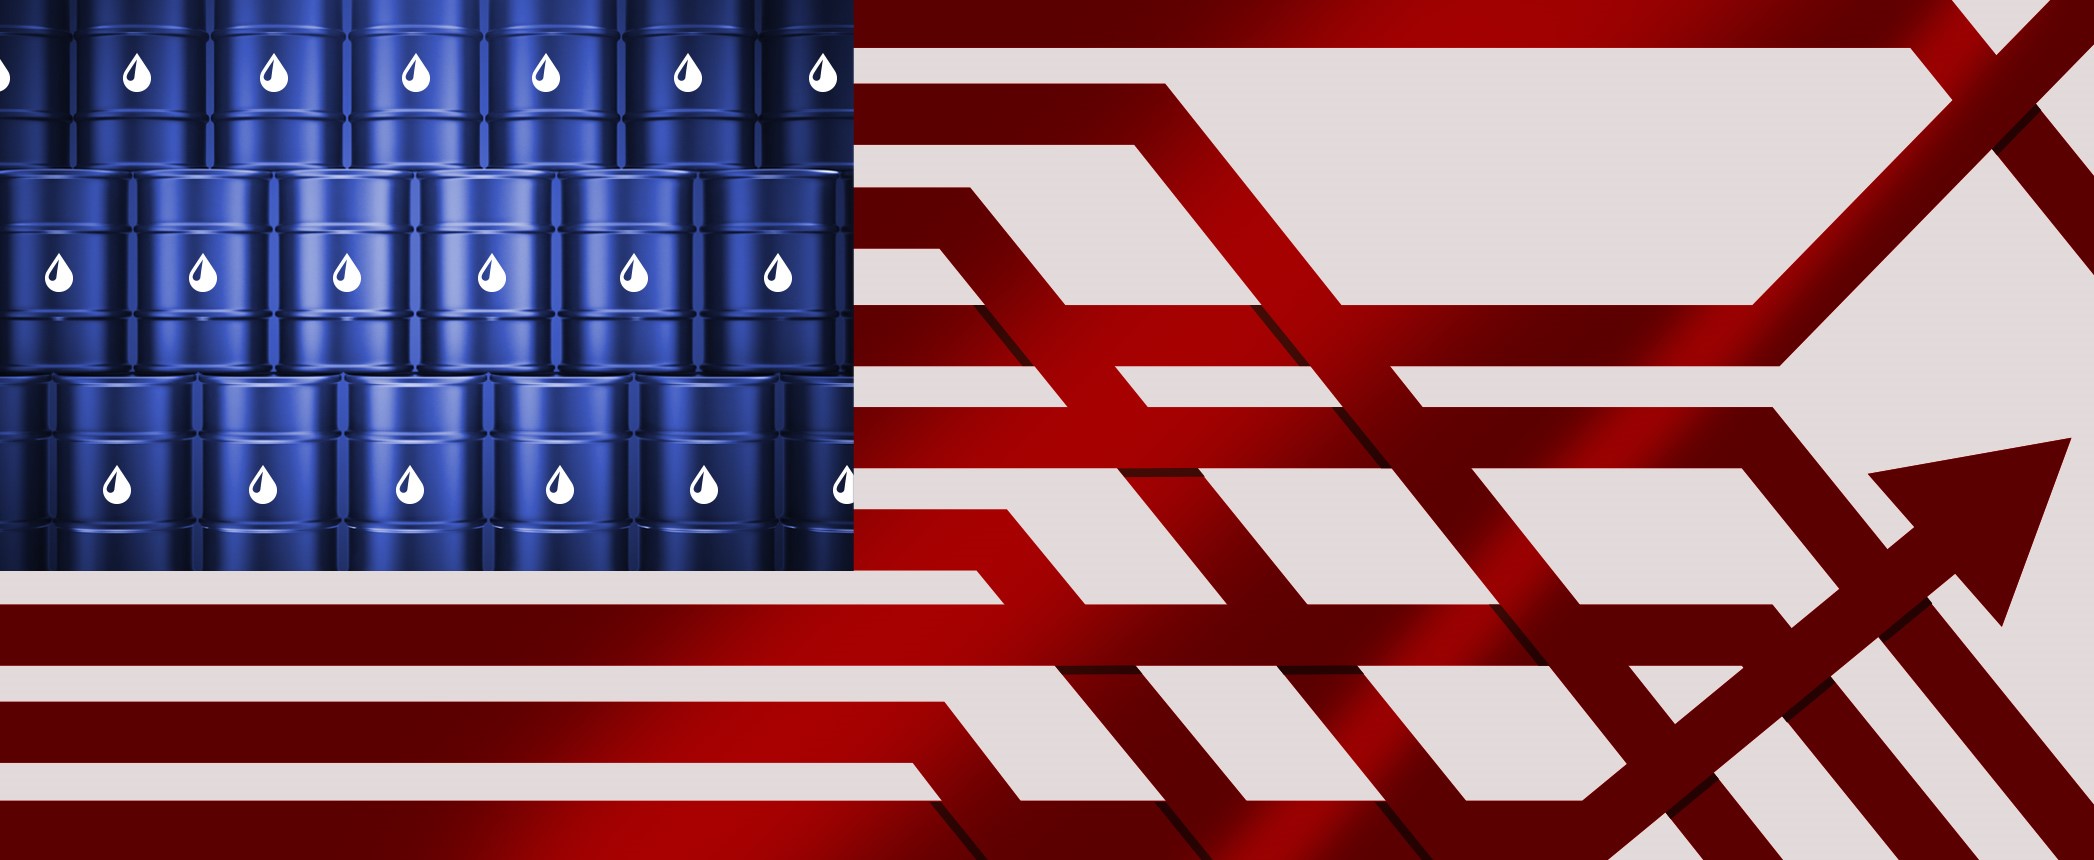 U.S. Base Oil Output Fell in 2019